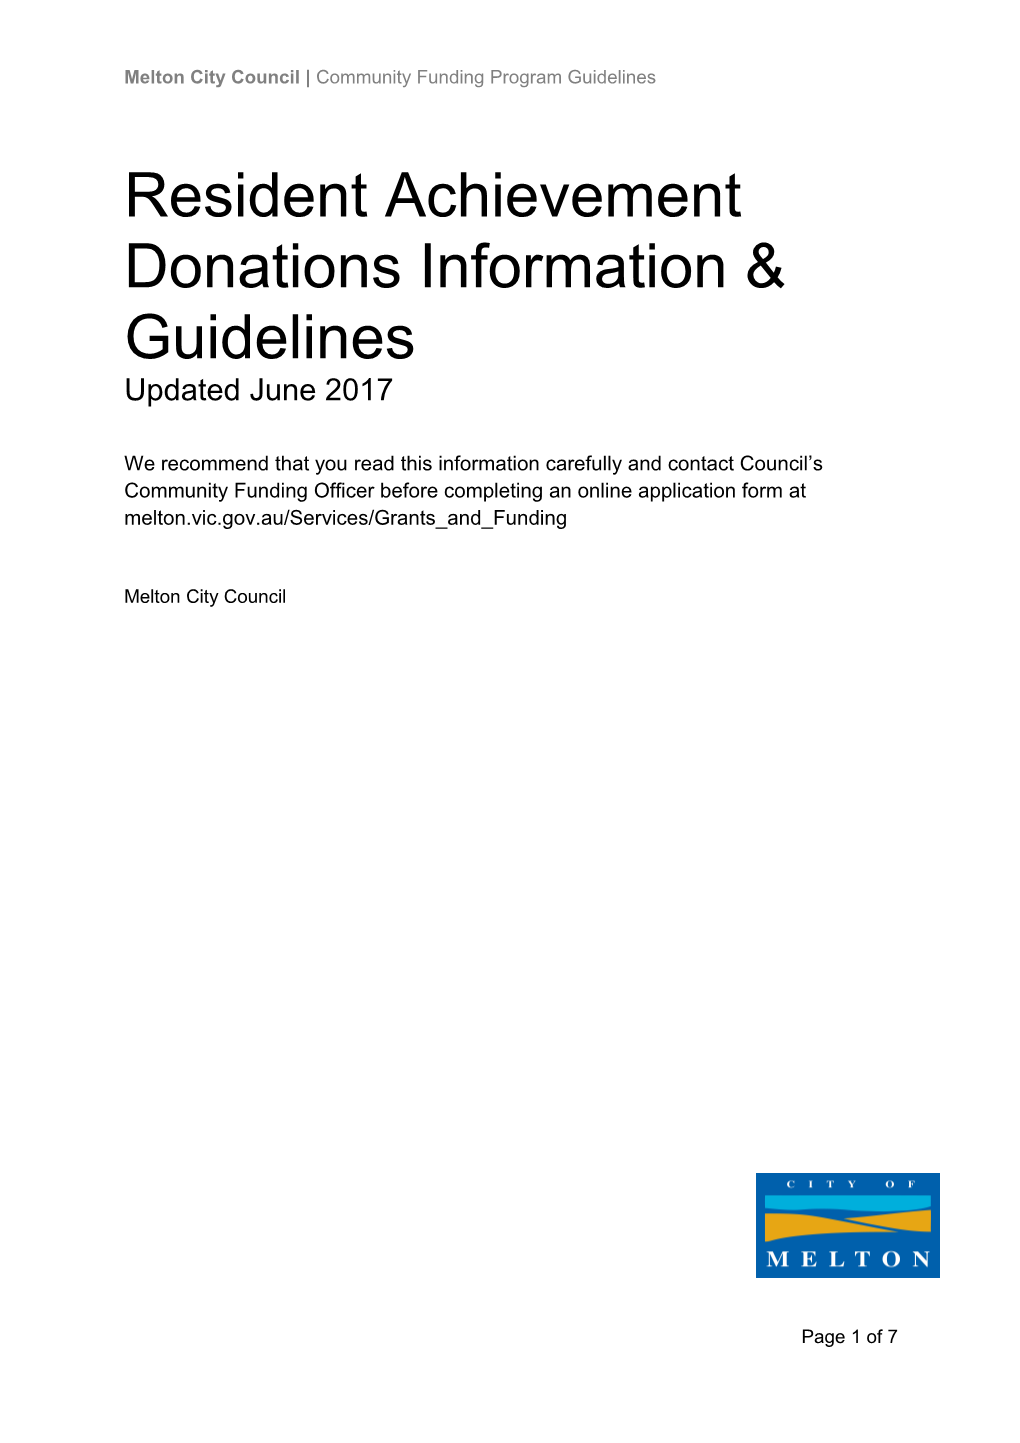 Resident Achievement Donations Information & Guidelines